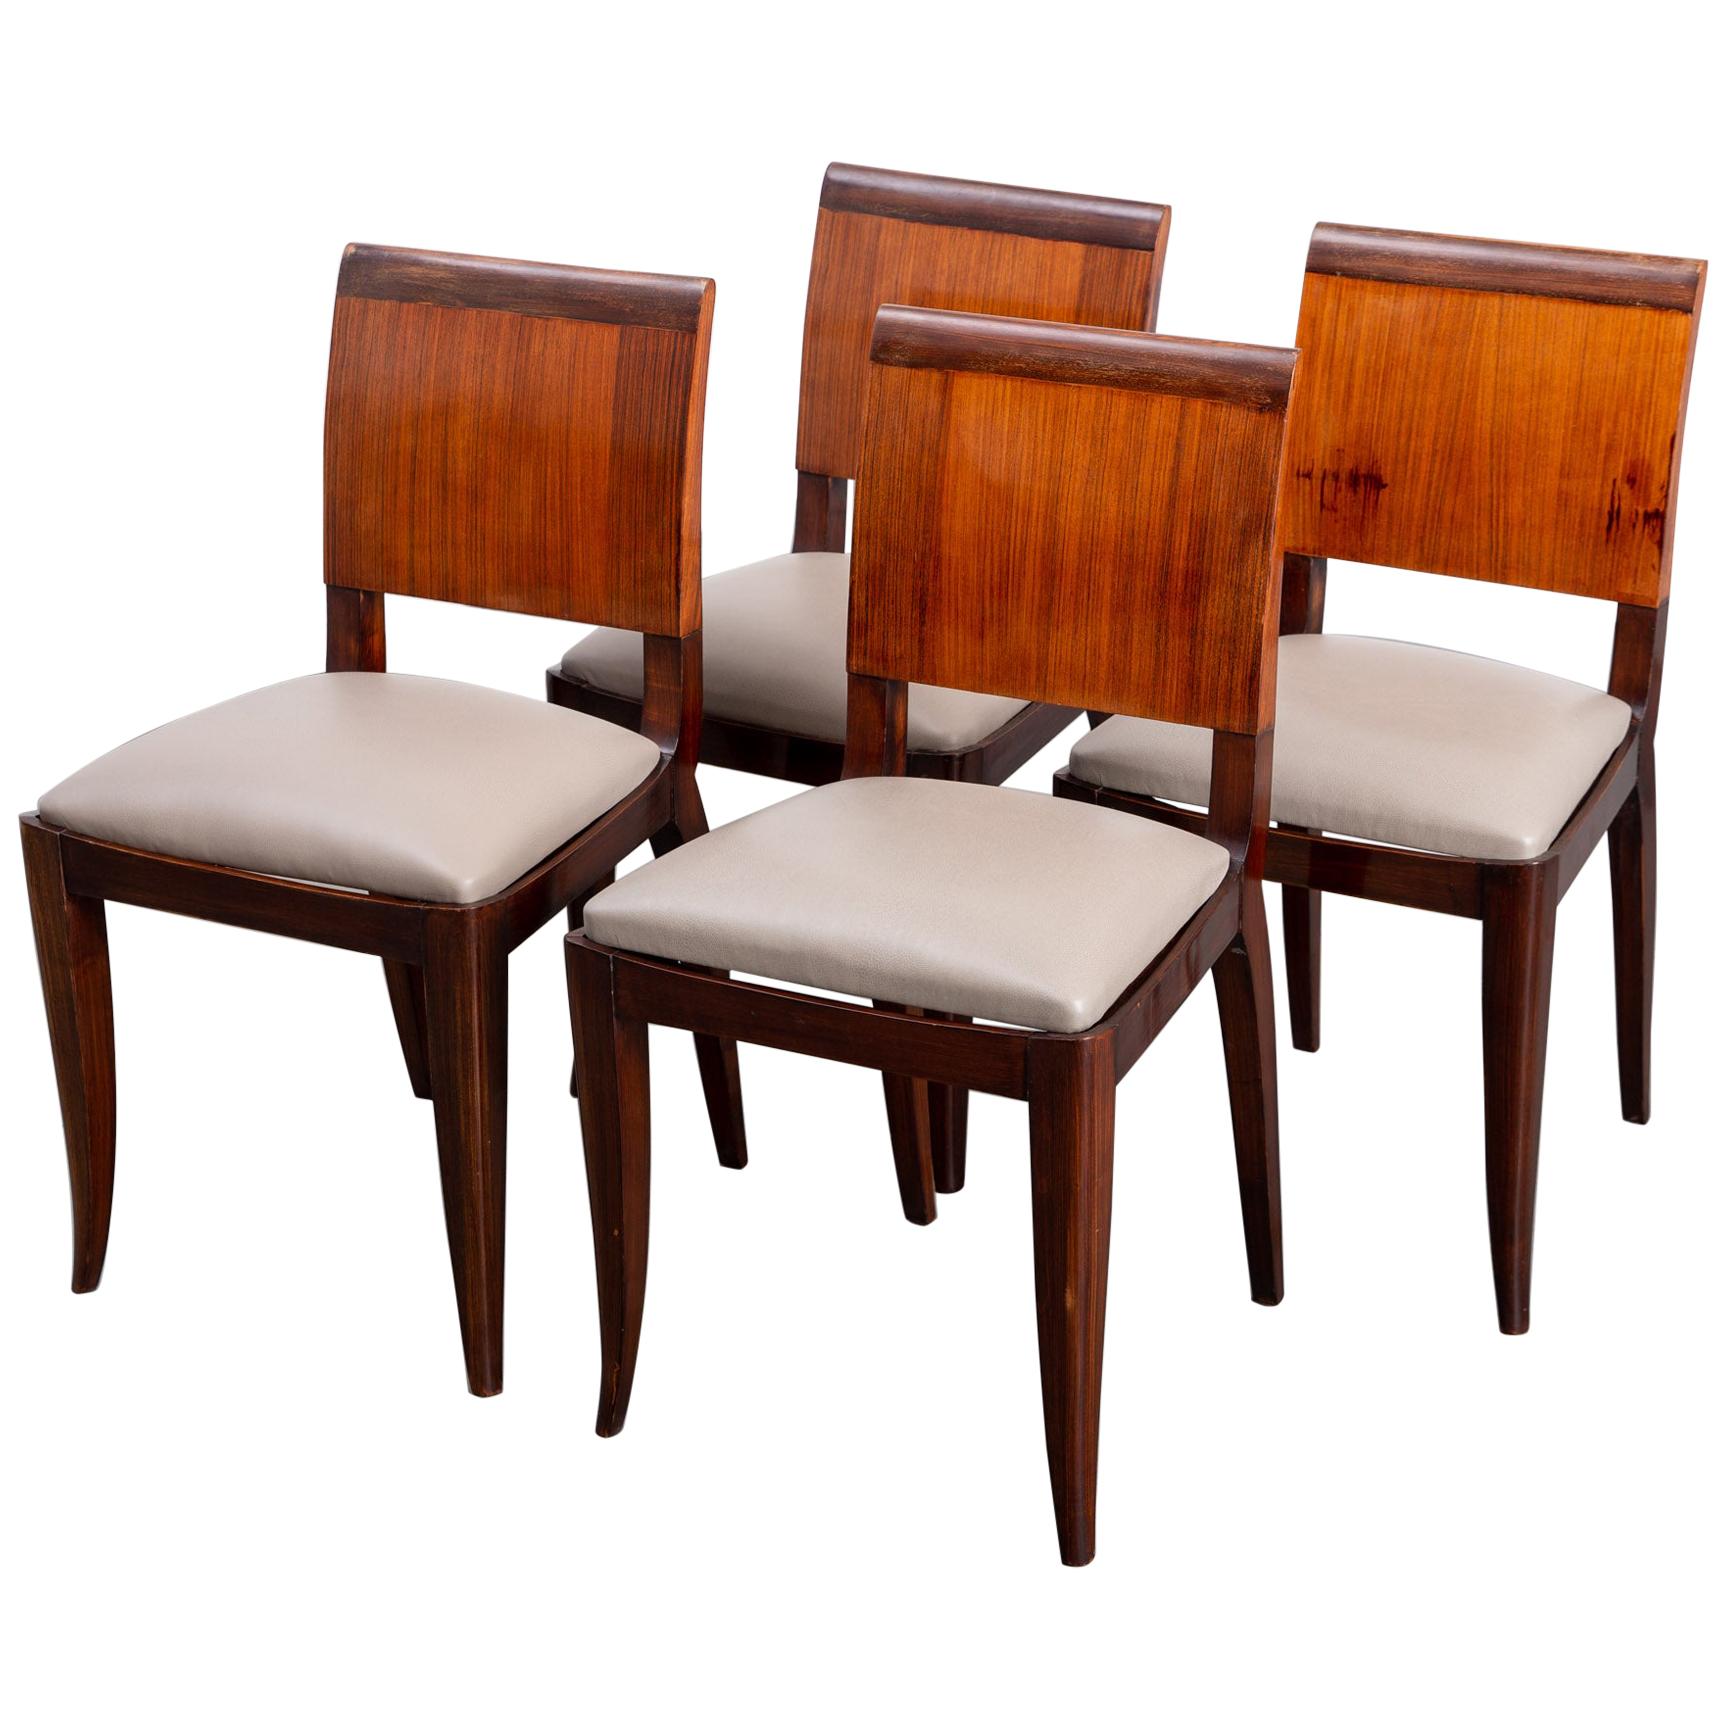 Set of 4 Newly Upholstered Ruhlman Style Art Deco Dining Chairs